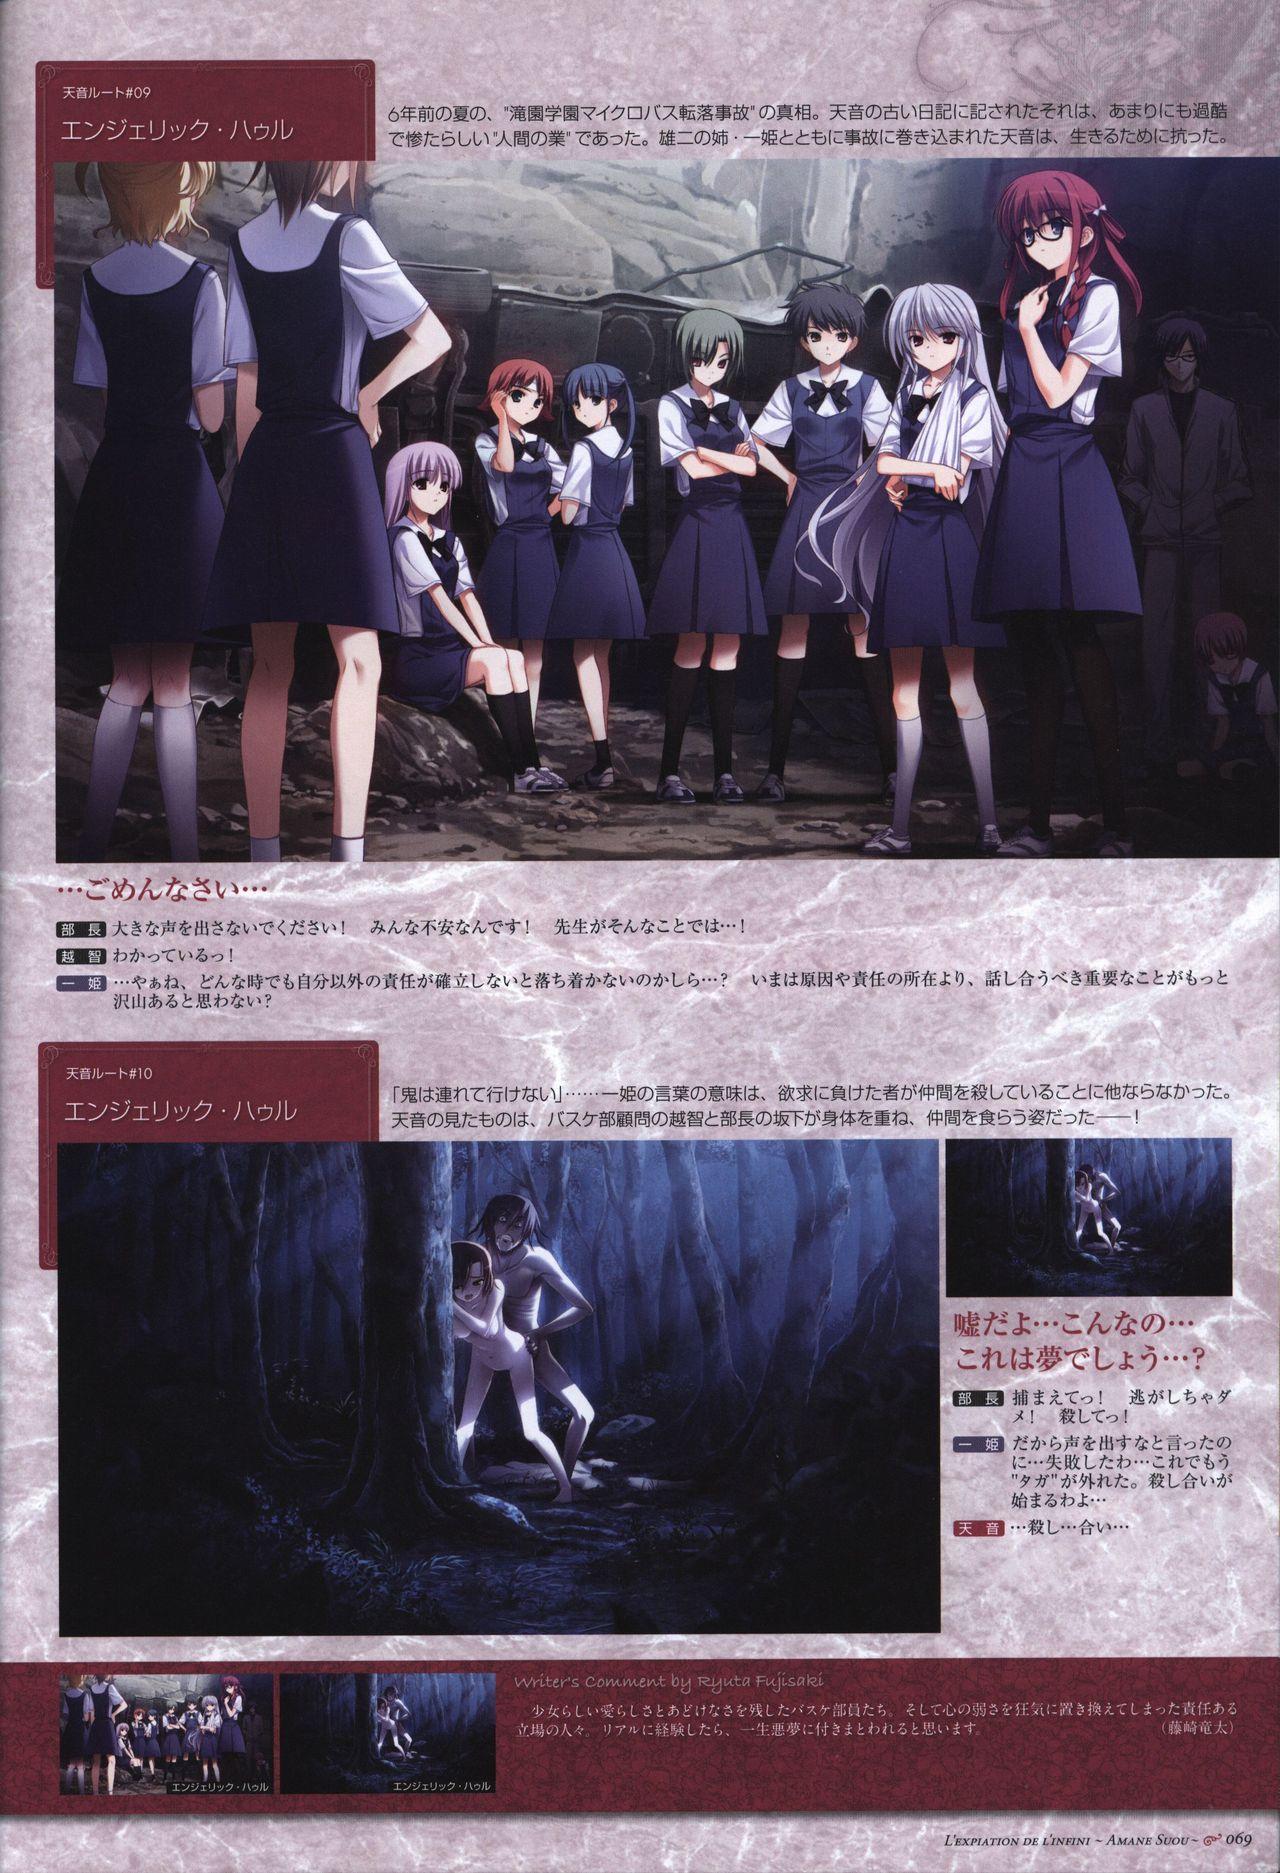 The Fruit of Grisaia Visual FanBook 69